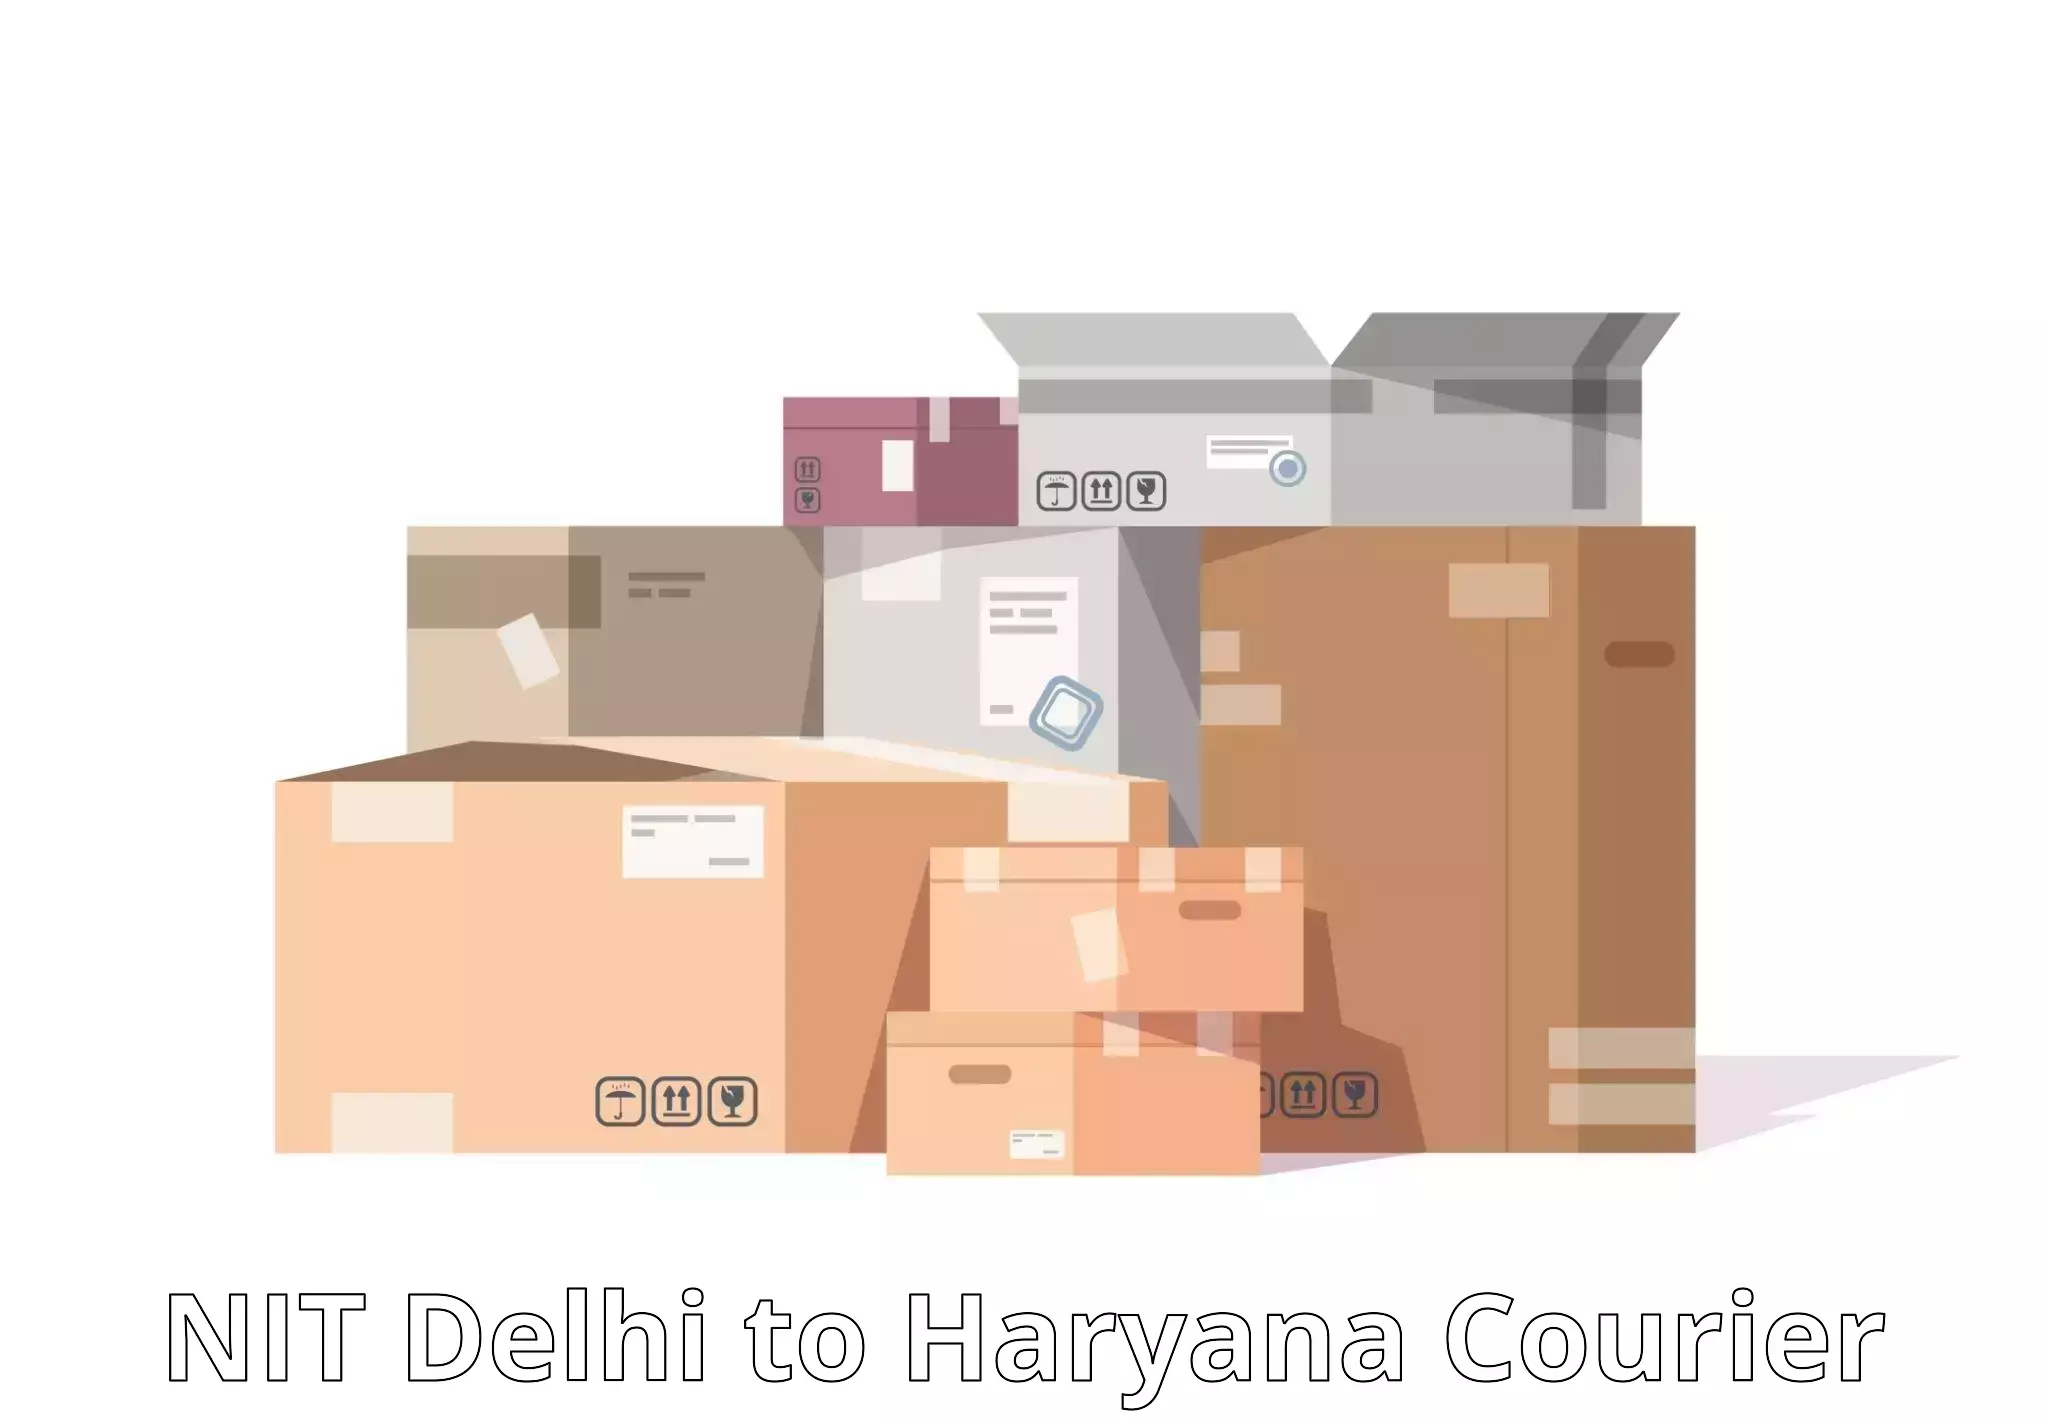 Courier service innovation NIT Delhi to Gurgaon